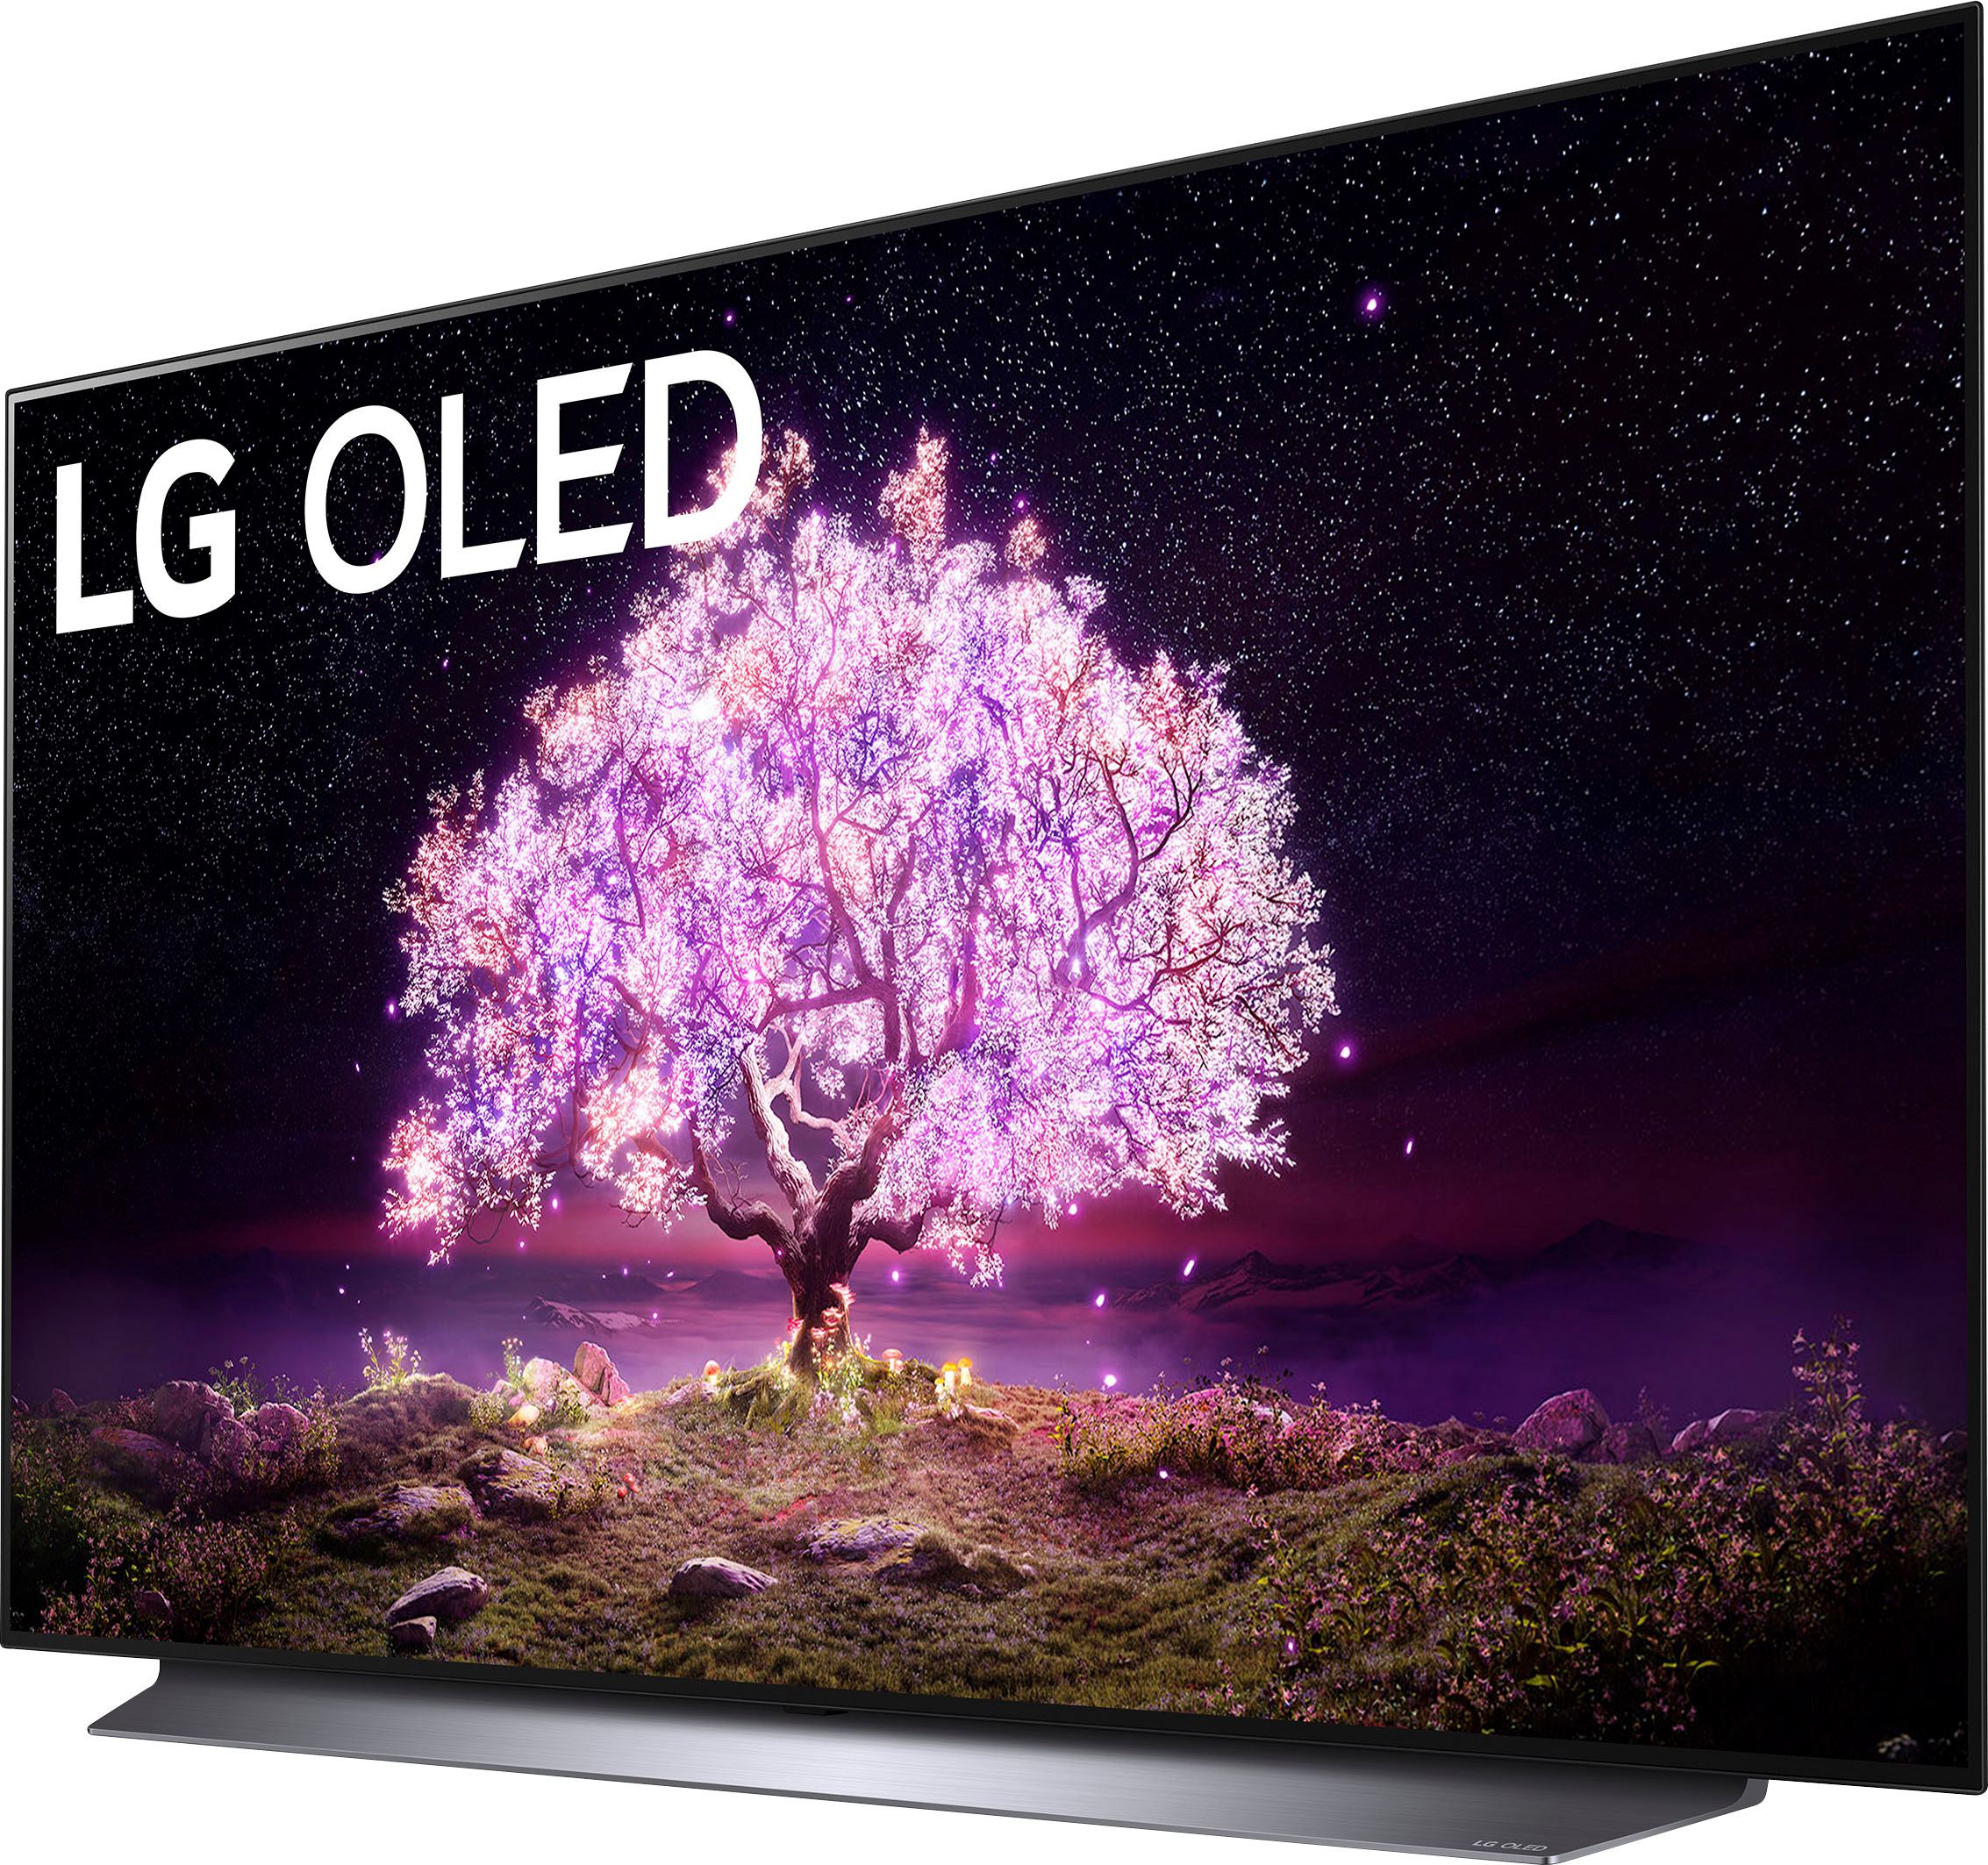 2021 Model Bundle with LG SP7Y 5.1 Channel High Res Audio DTS Virtual:X Sound Bar with Wireless Subwoofer and TaskRabbit Installation Services LG OLED55C1PUB 55 Inch 4K Smart OLED TV with AI ThinQ